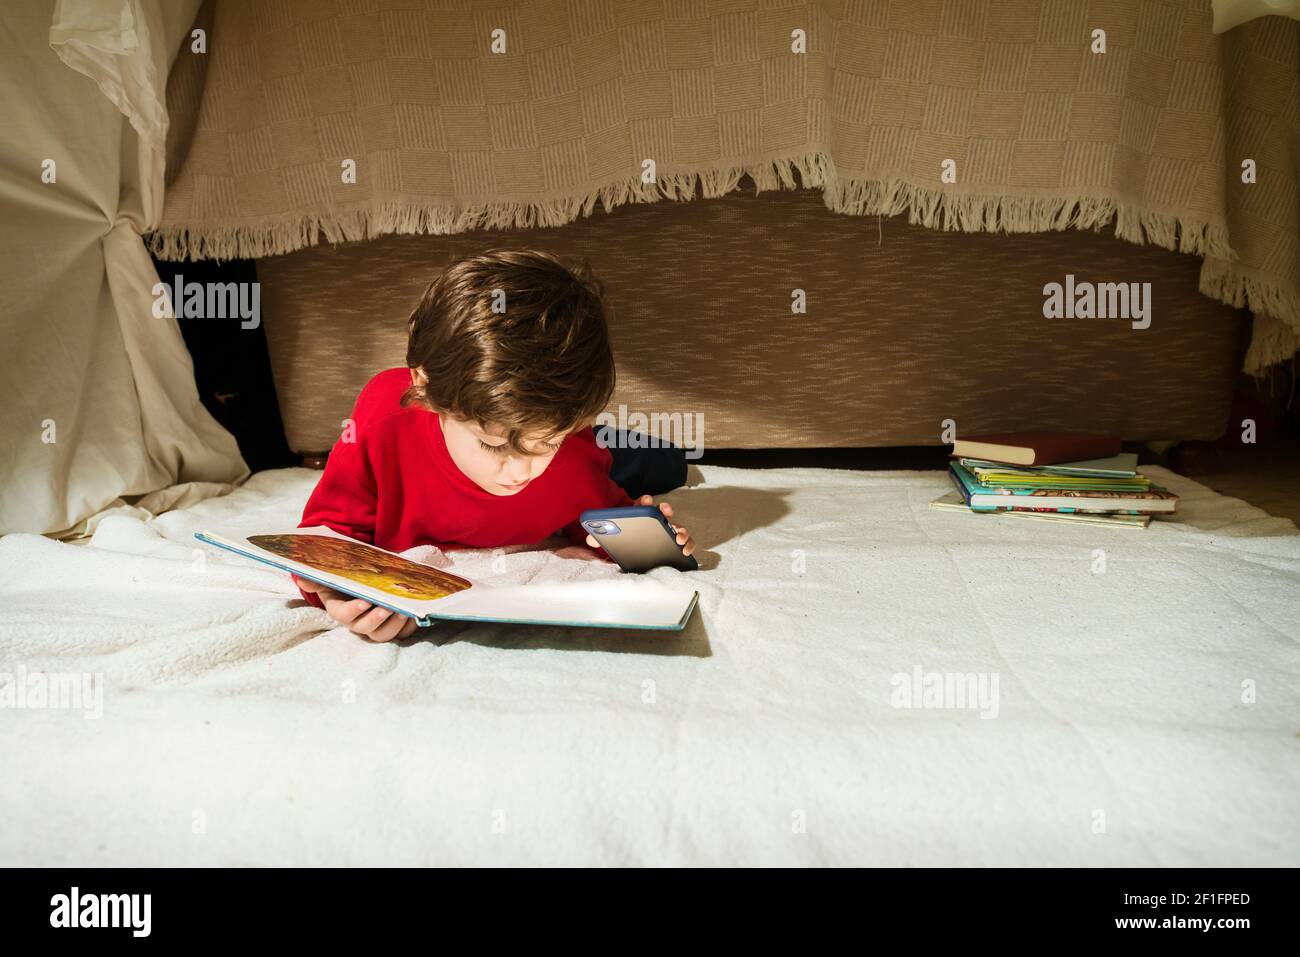 Child reading a book lying on a blanket and shining a smartphone flashlight, in a makeshift tent in his living room. Home lifestyle concept. Stock Photo